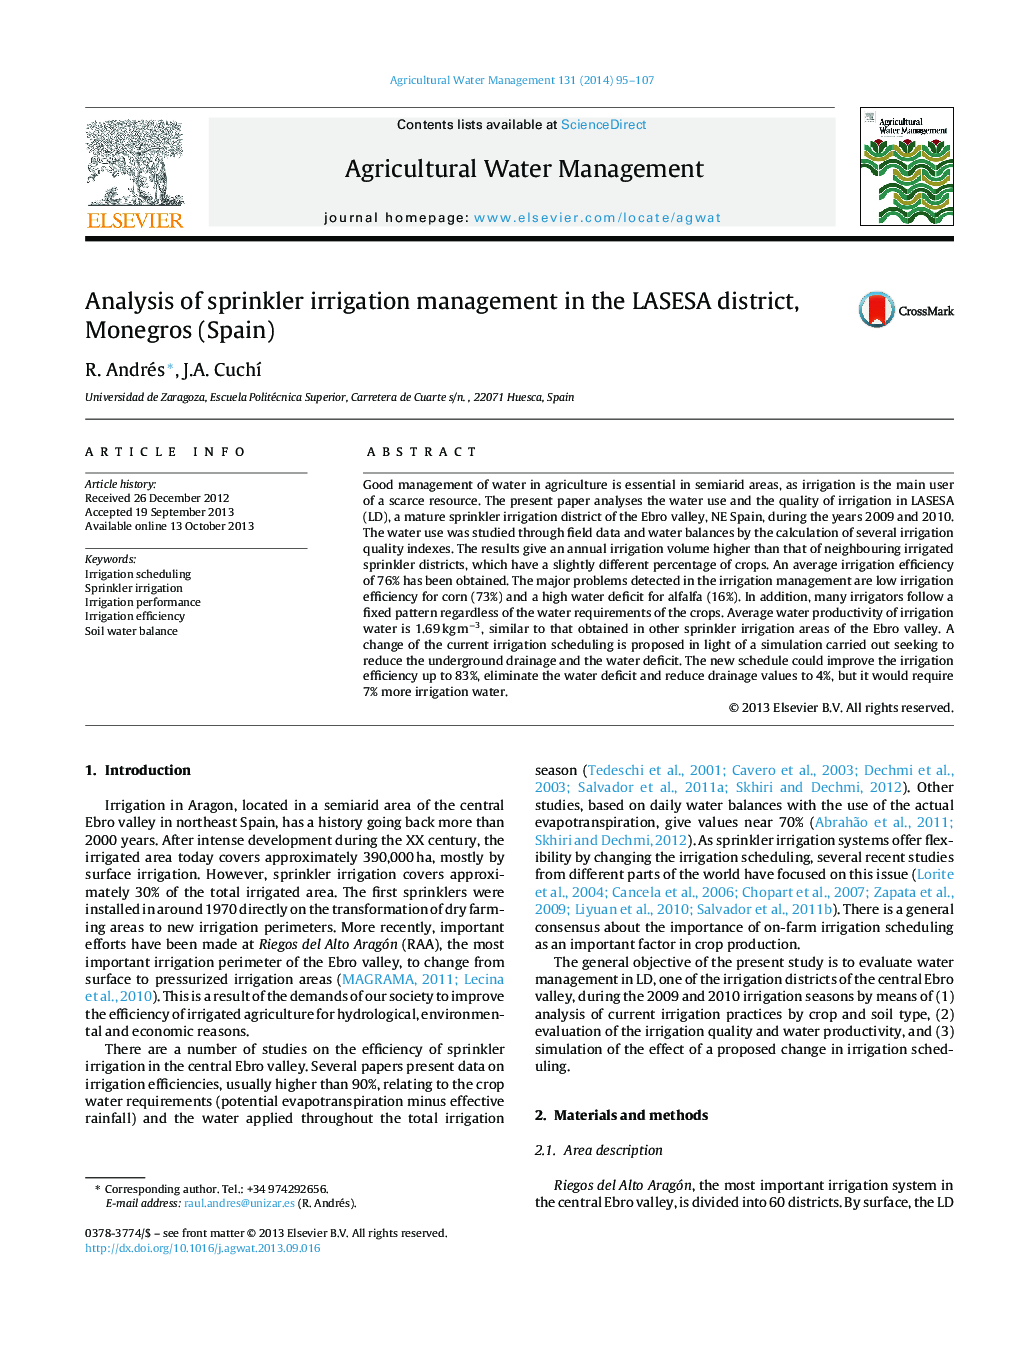 Analysis of sprinkler irrigation management in the LASESA district, Monegros (Spain)